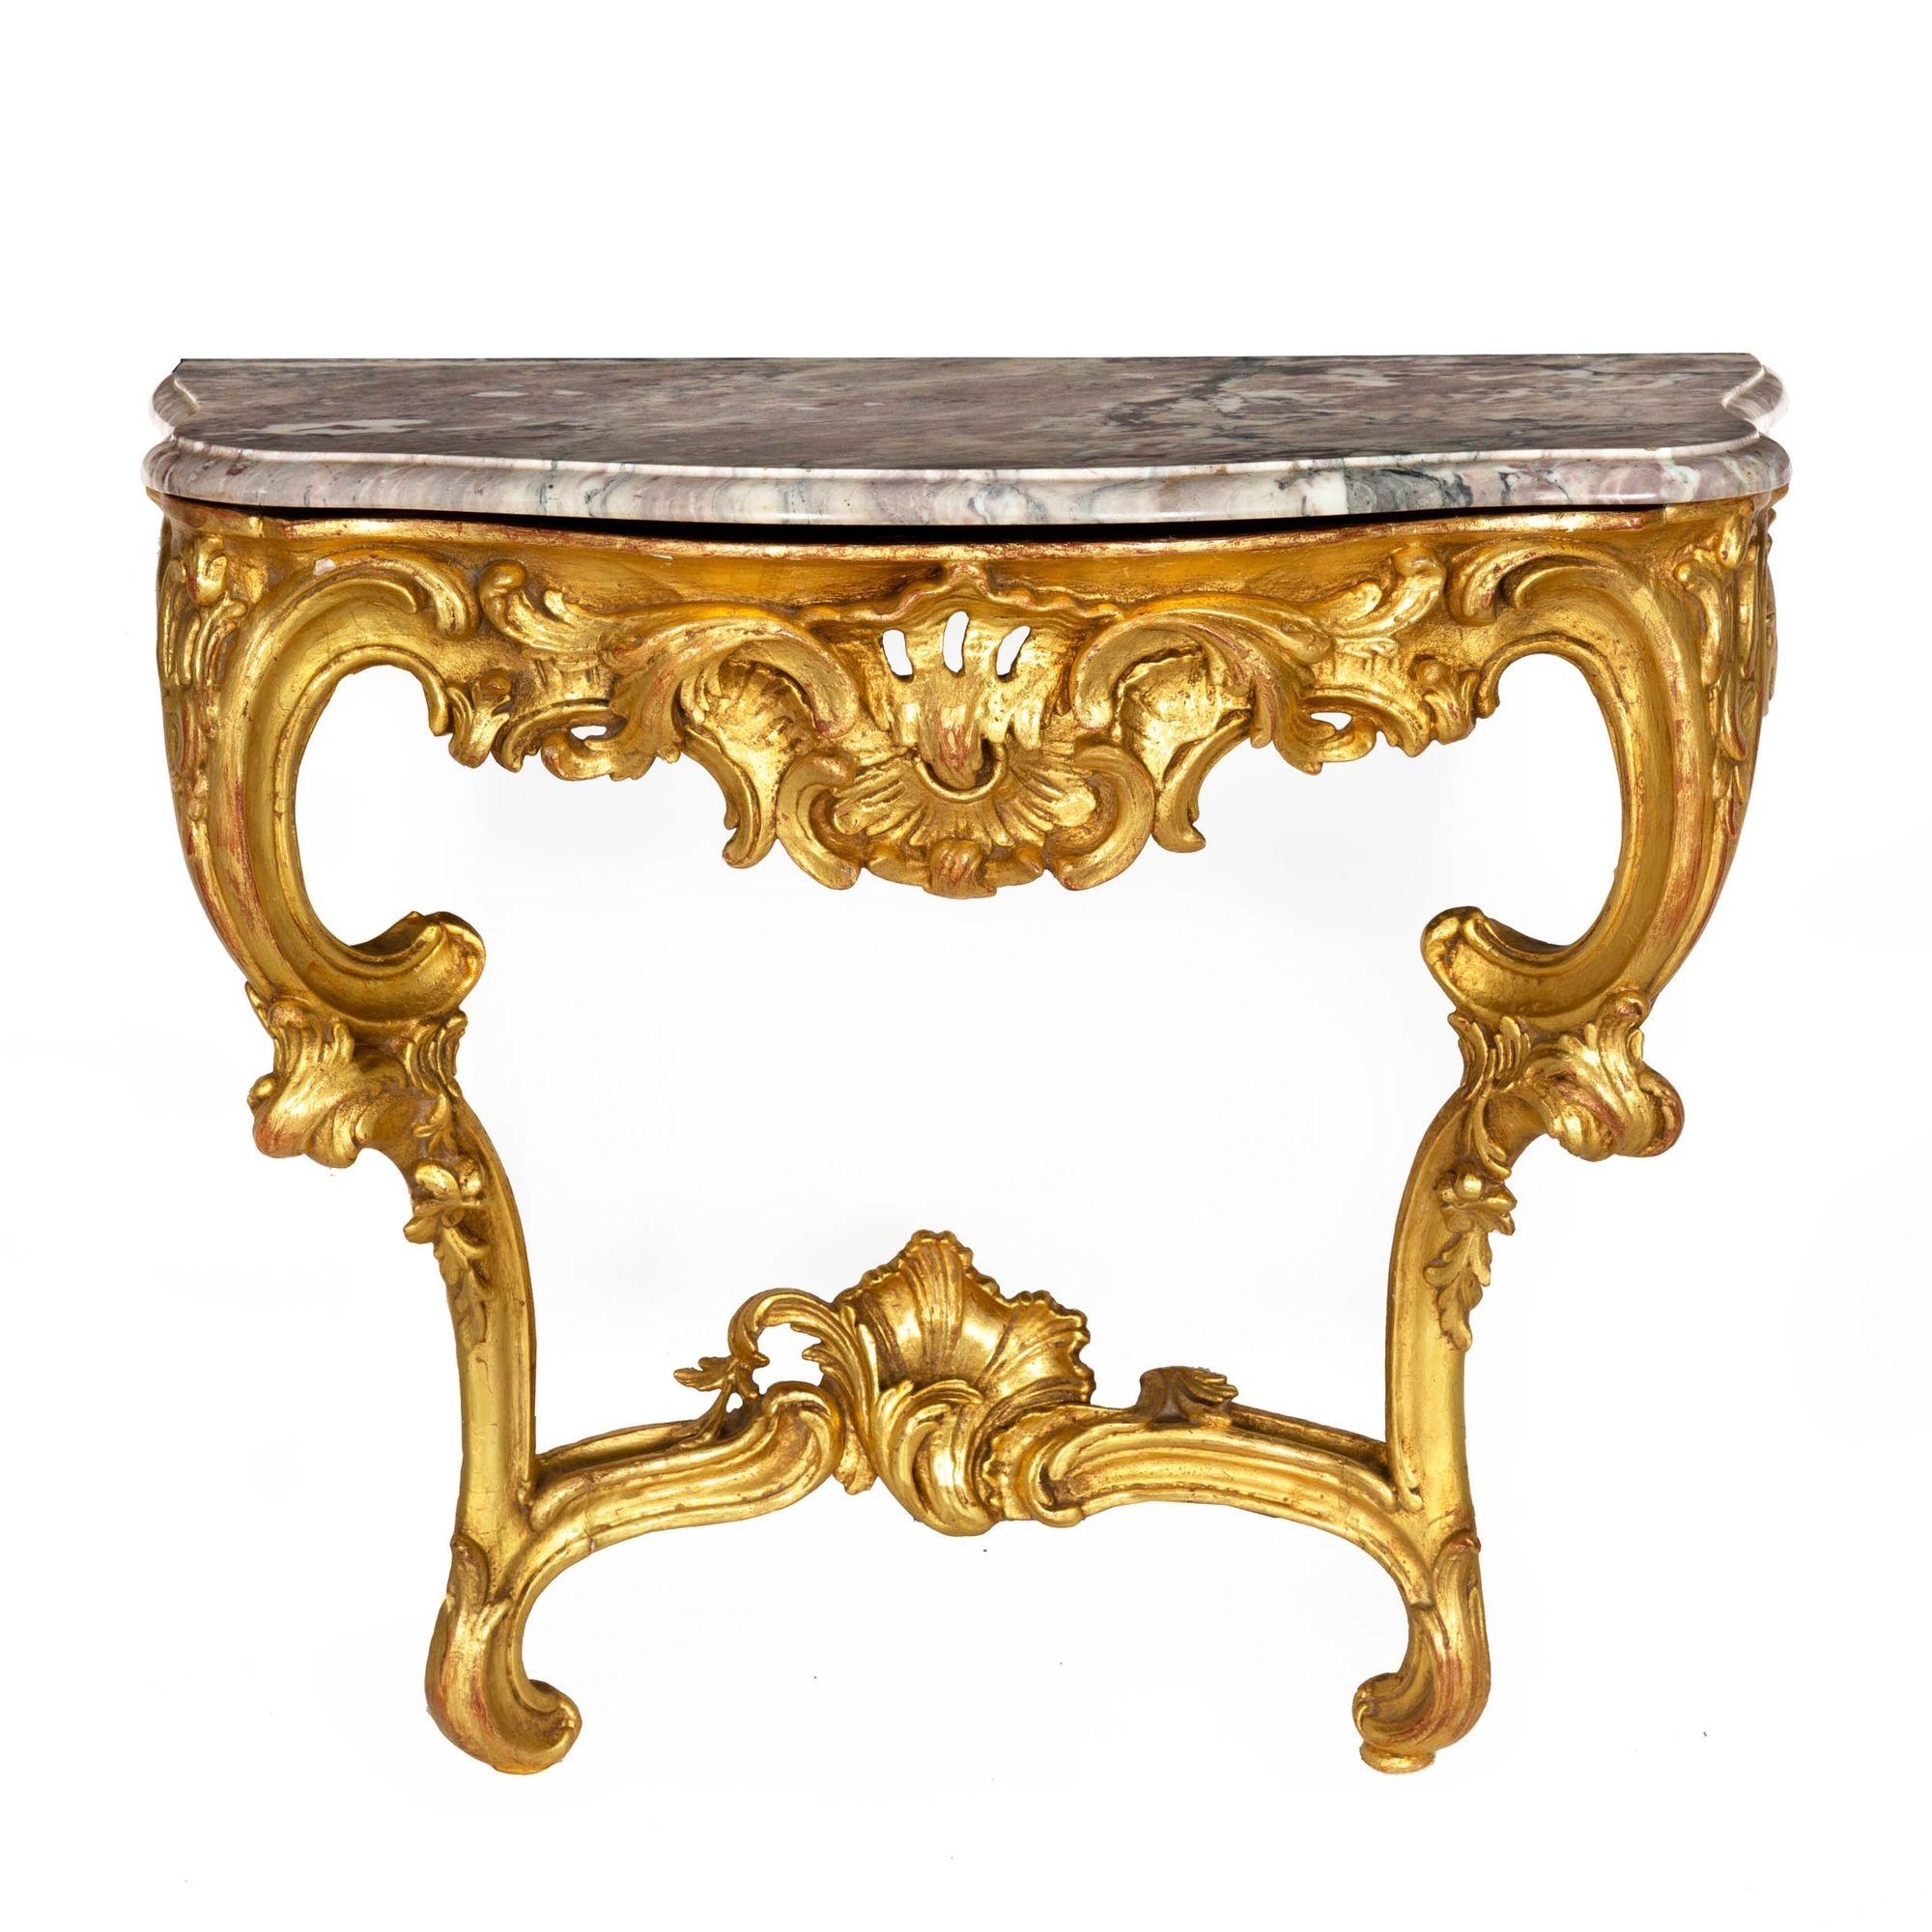 A striking pair of carved giltwood Rococo period console tables with an undulating curvature in the gentle serpentine of the Breccia Medicea marble tops that follows through to the body of each. These gorgeous stones are characterized by hues of